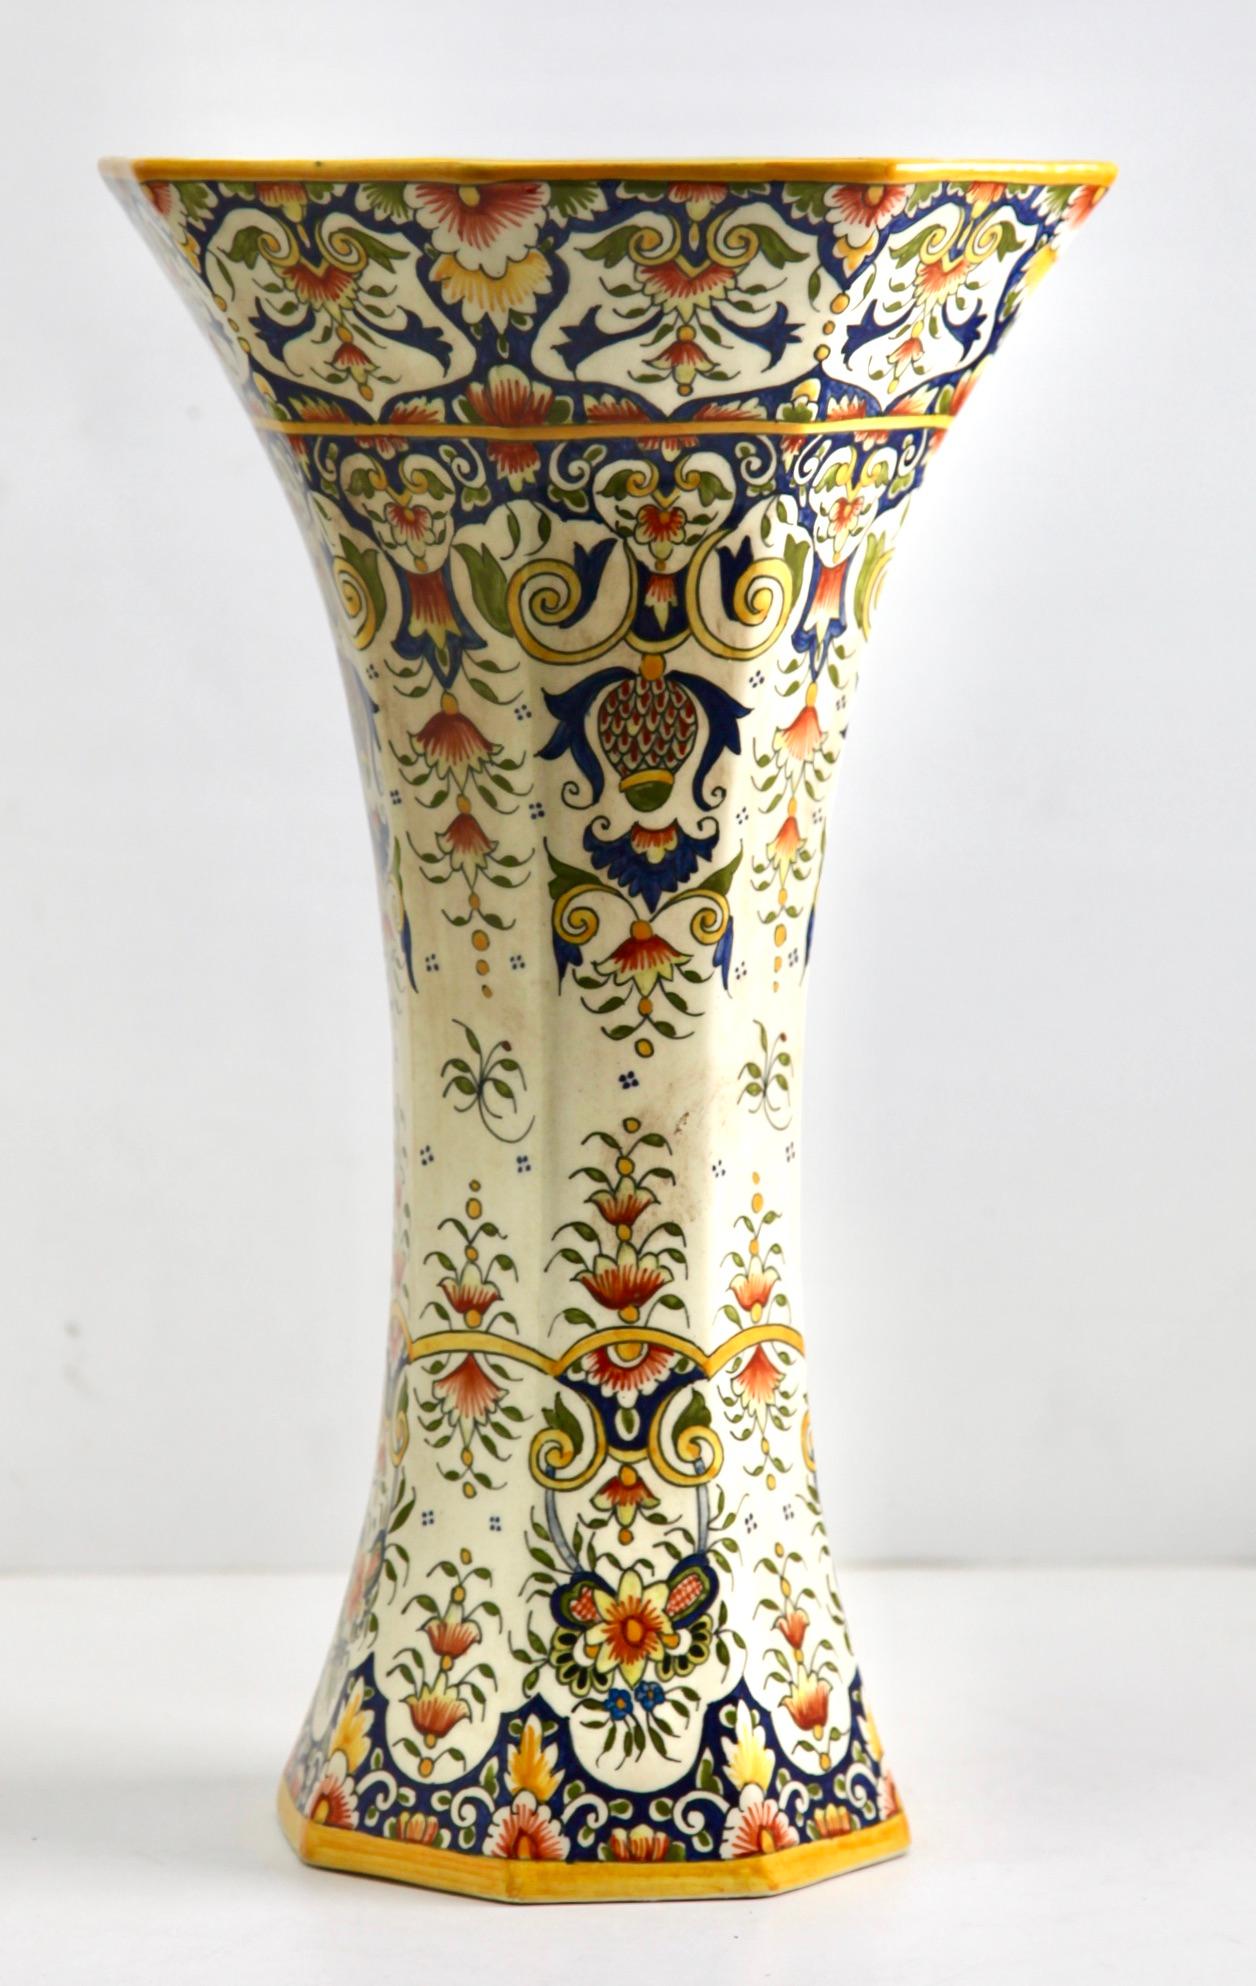 The designs on this French faience group is typical of pottery made in Rouen. 
Early 20th Century French Hand-Painted Faience Vasse from Rouen 
Marking on the bottom: 